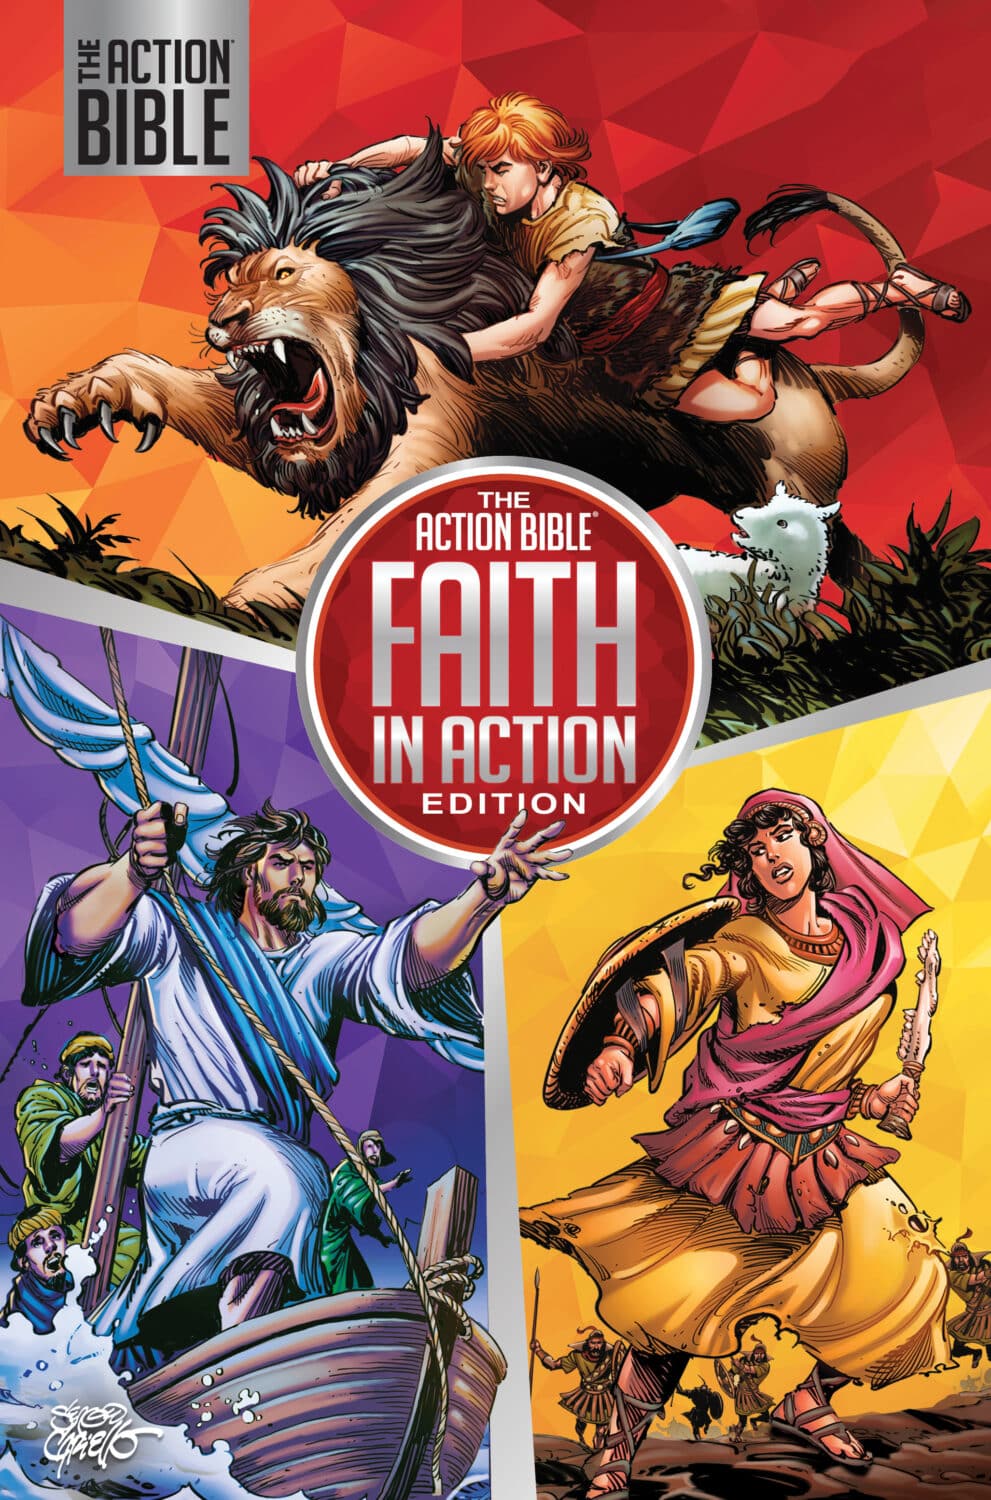 The Action Bible Faith in Action book cover image